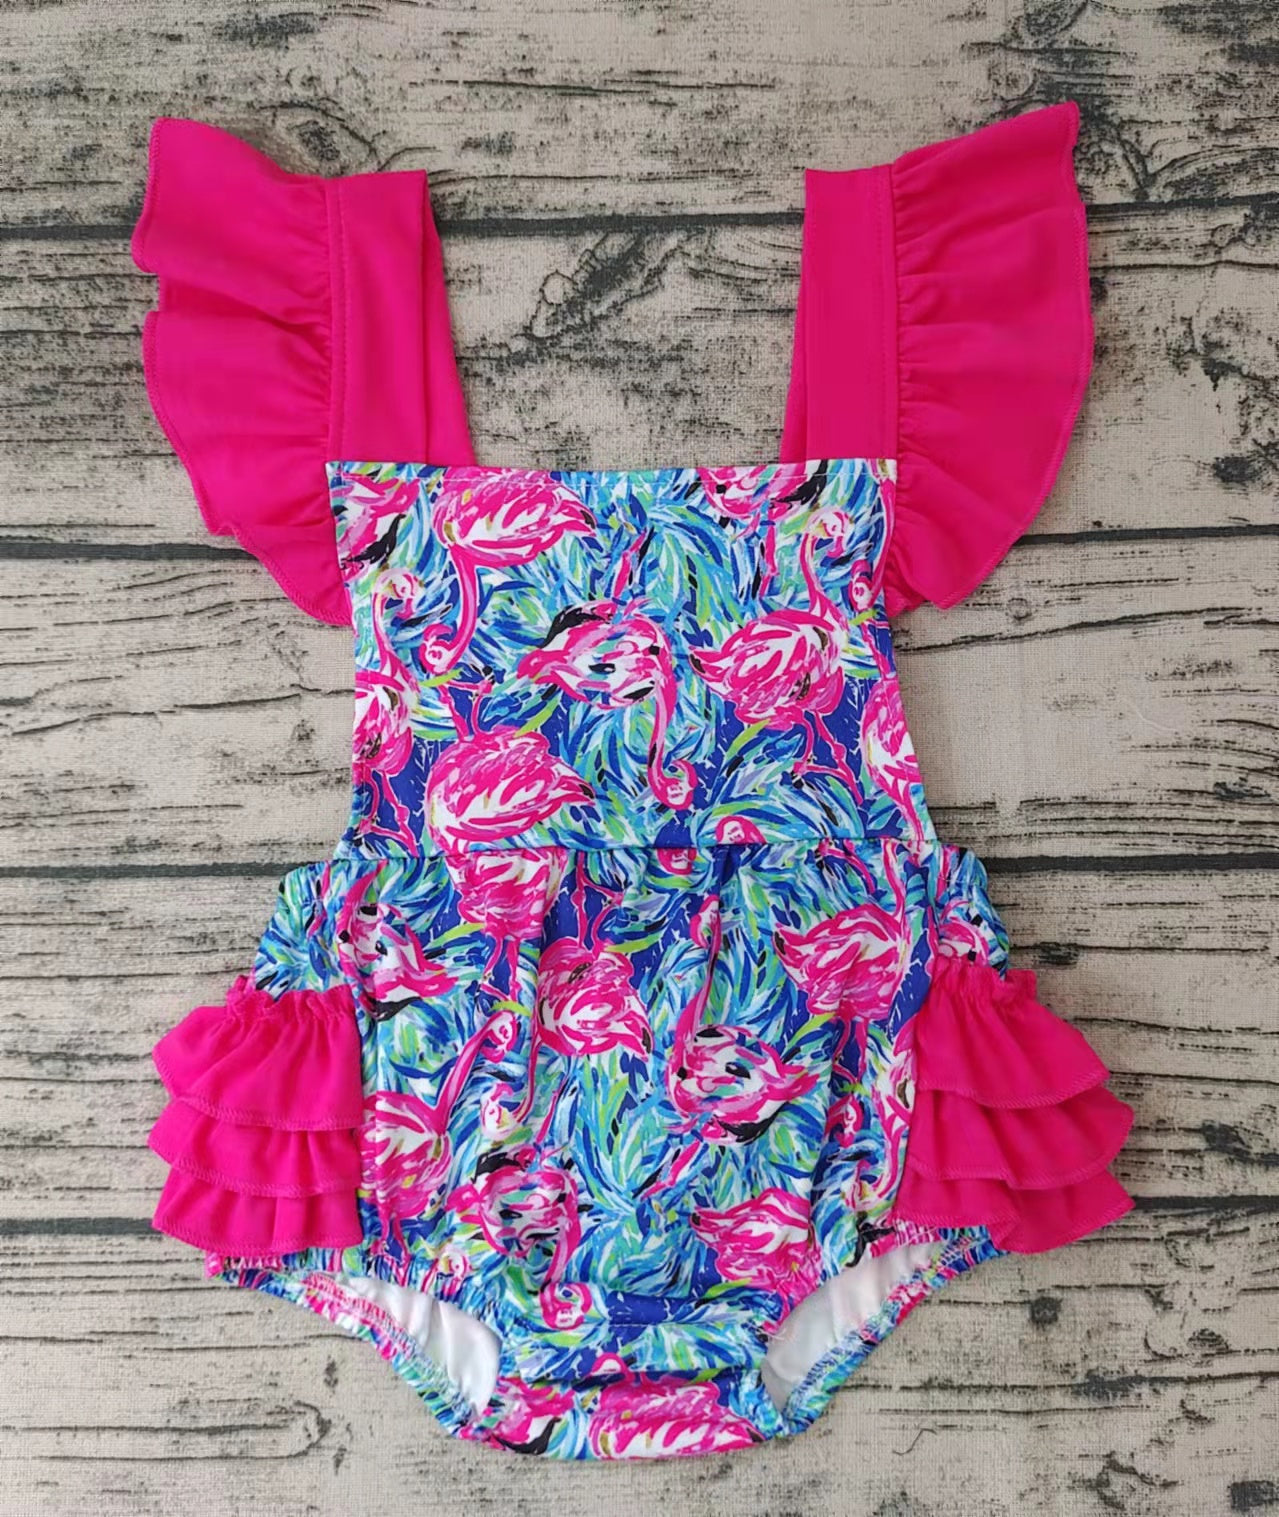 Baby girls flamingo floral ruffle romper bubbles